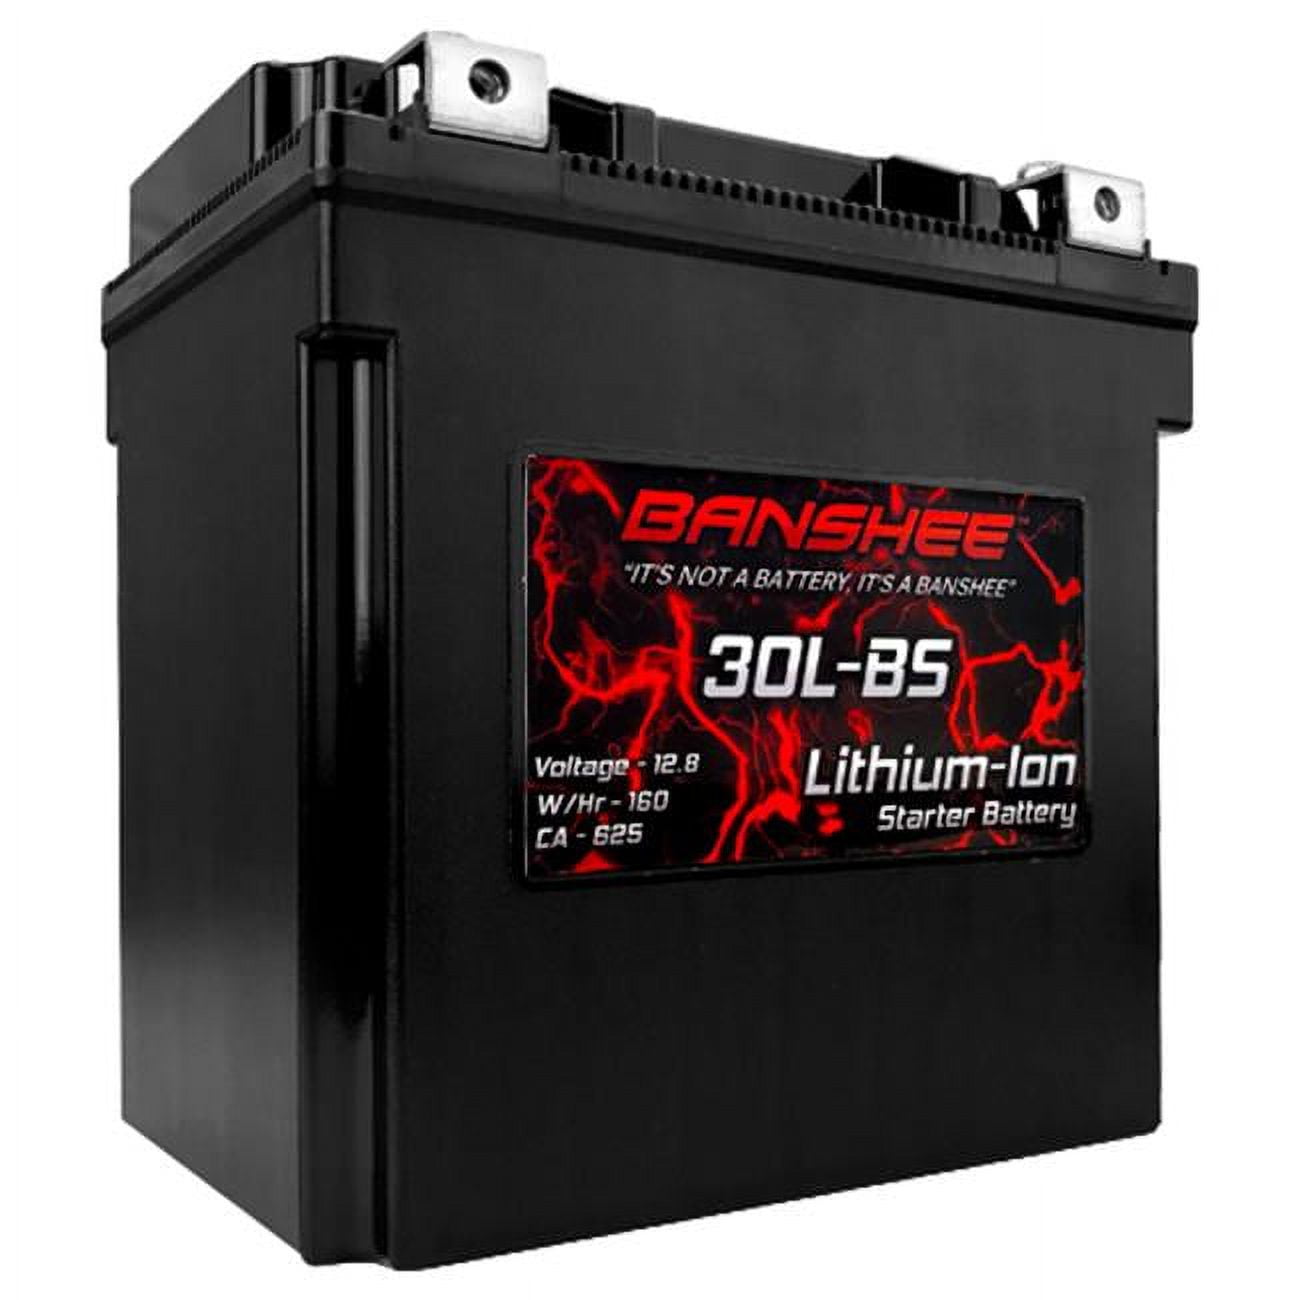 Picture of Banshee DLFP30L-BS-02 12.8V Lithium Ion Battery for Replacement YTX30L-BS Harley Davidson Built In Volt Meter